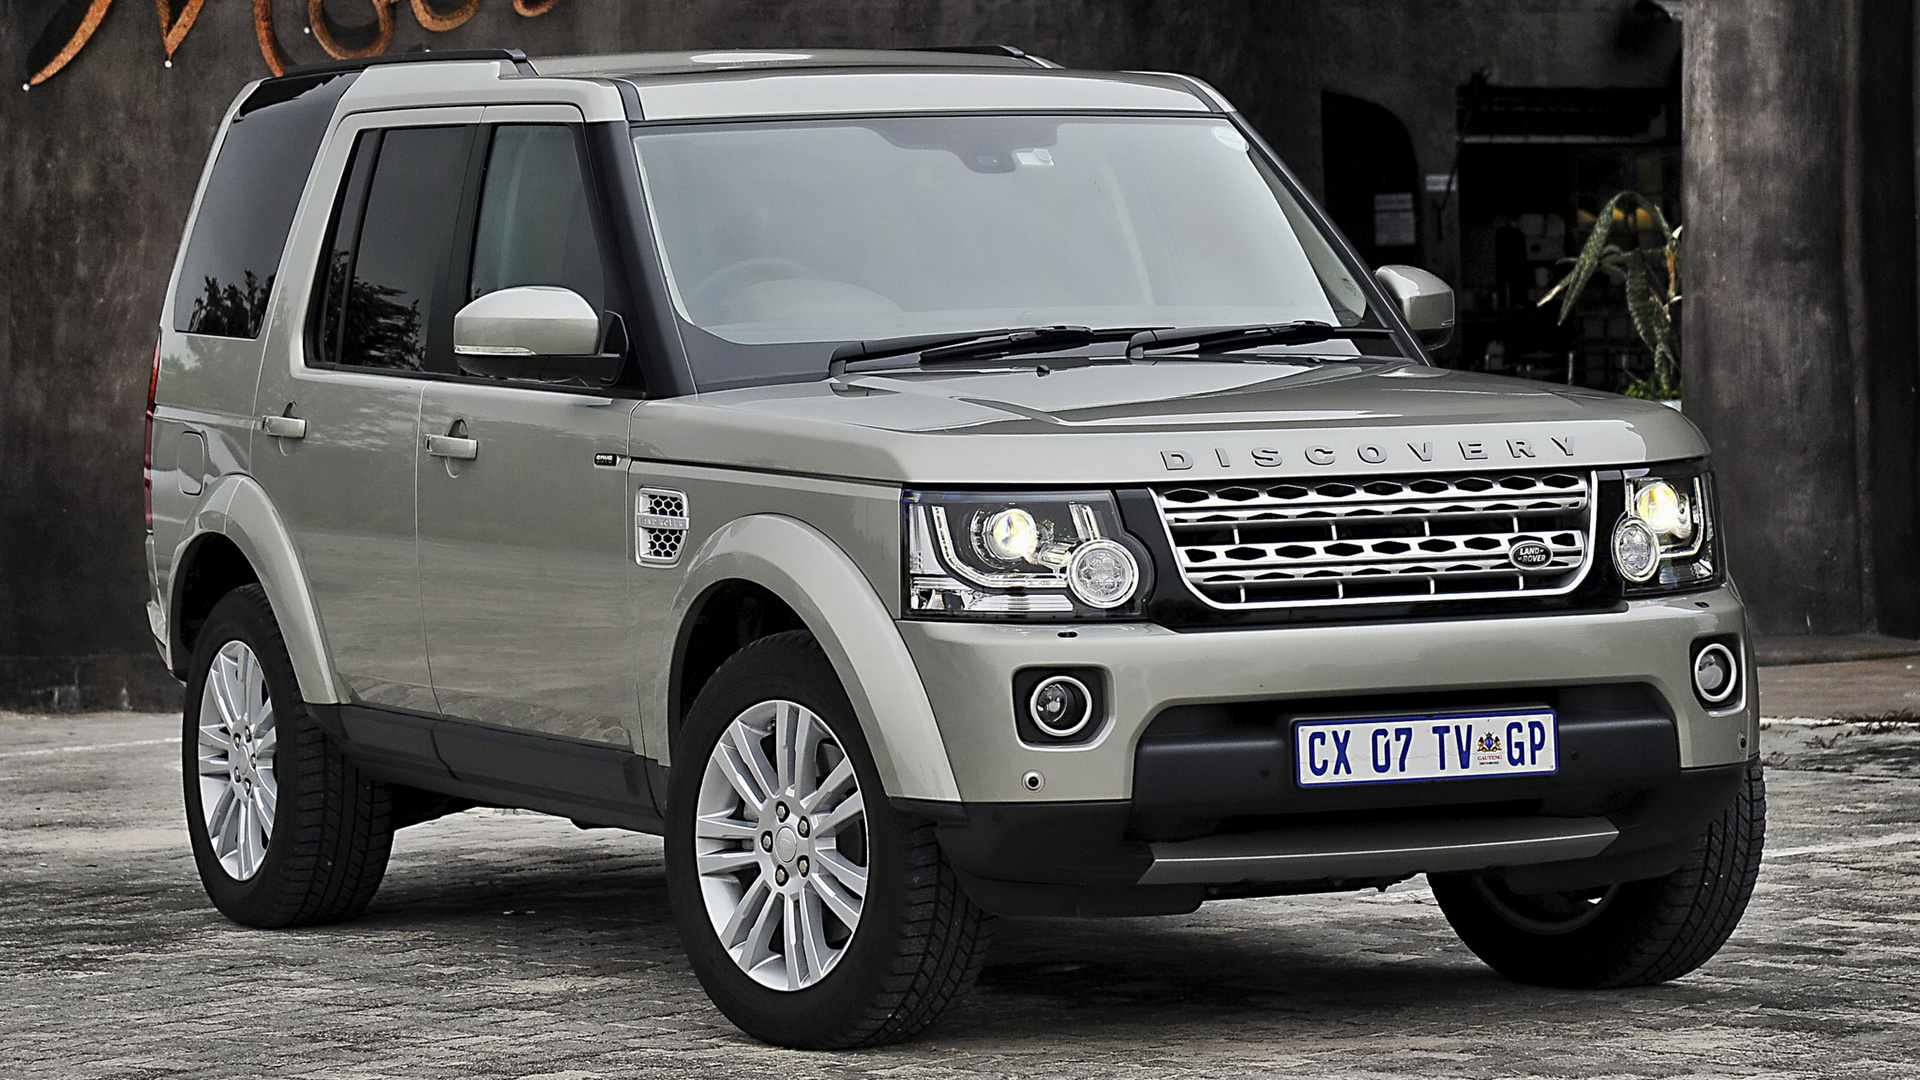 2014 Land Rover Discovery HSE (ZA) - Wallpapers and HD Images | Car Pixel
 2014 Land Rover Discovery Wallpaper